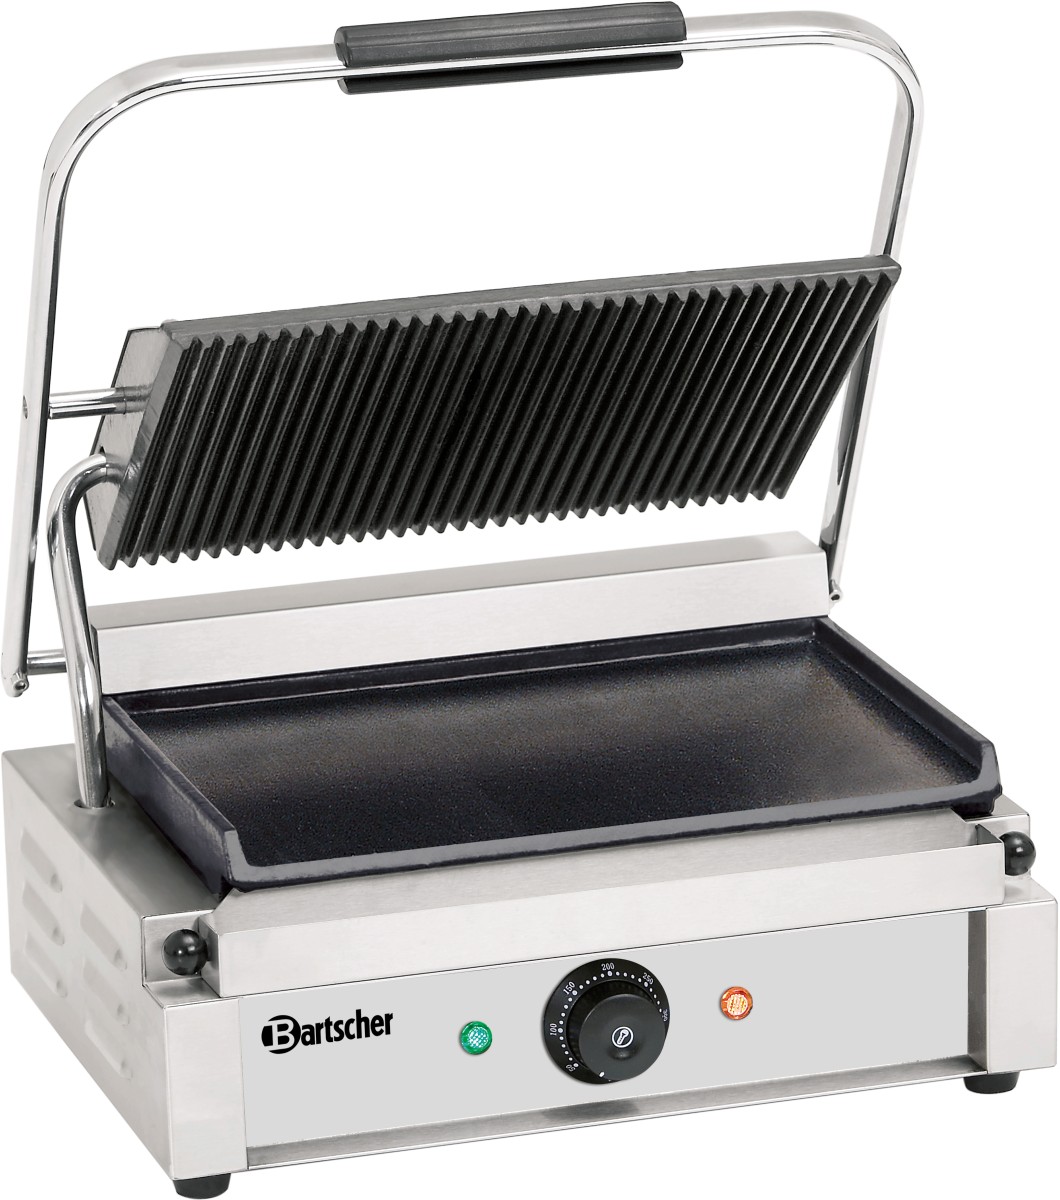  Bartscher Contact grill "Panini" 1GR 